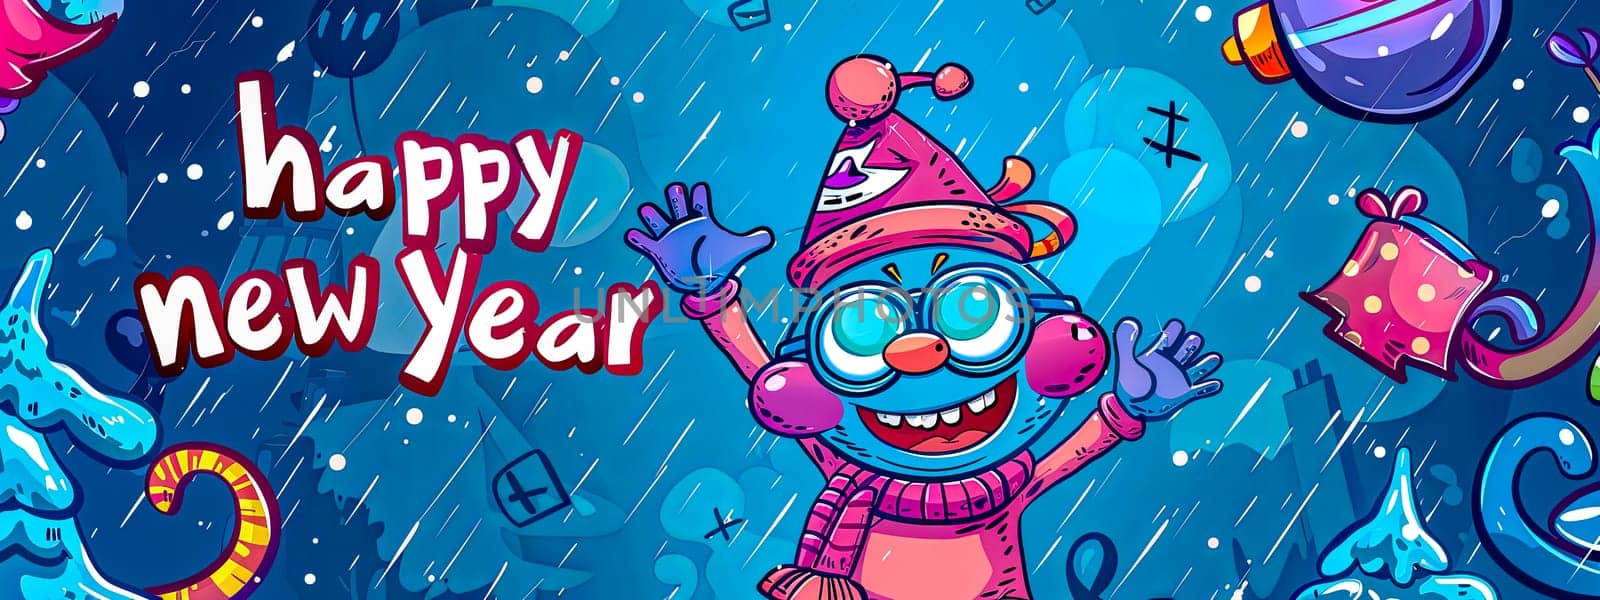 Vibrant cartoon illustration celebrating new year with a character in a party mood, confetti, and festive text